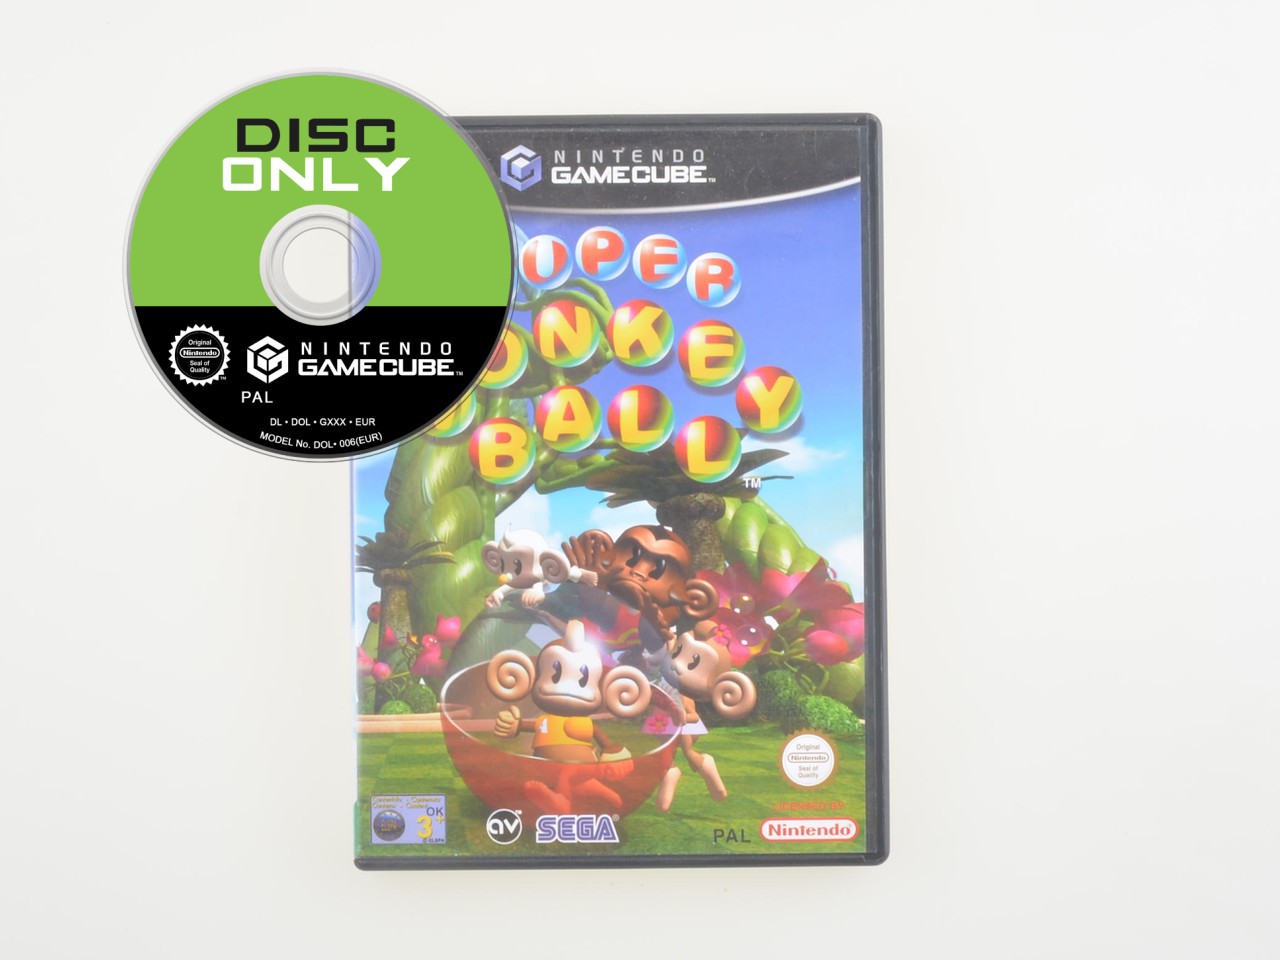 Super Monkey Ball - Disc Only - Gamecube Games